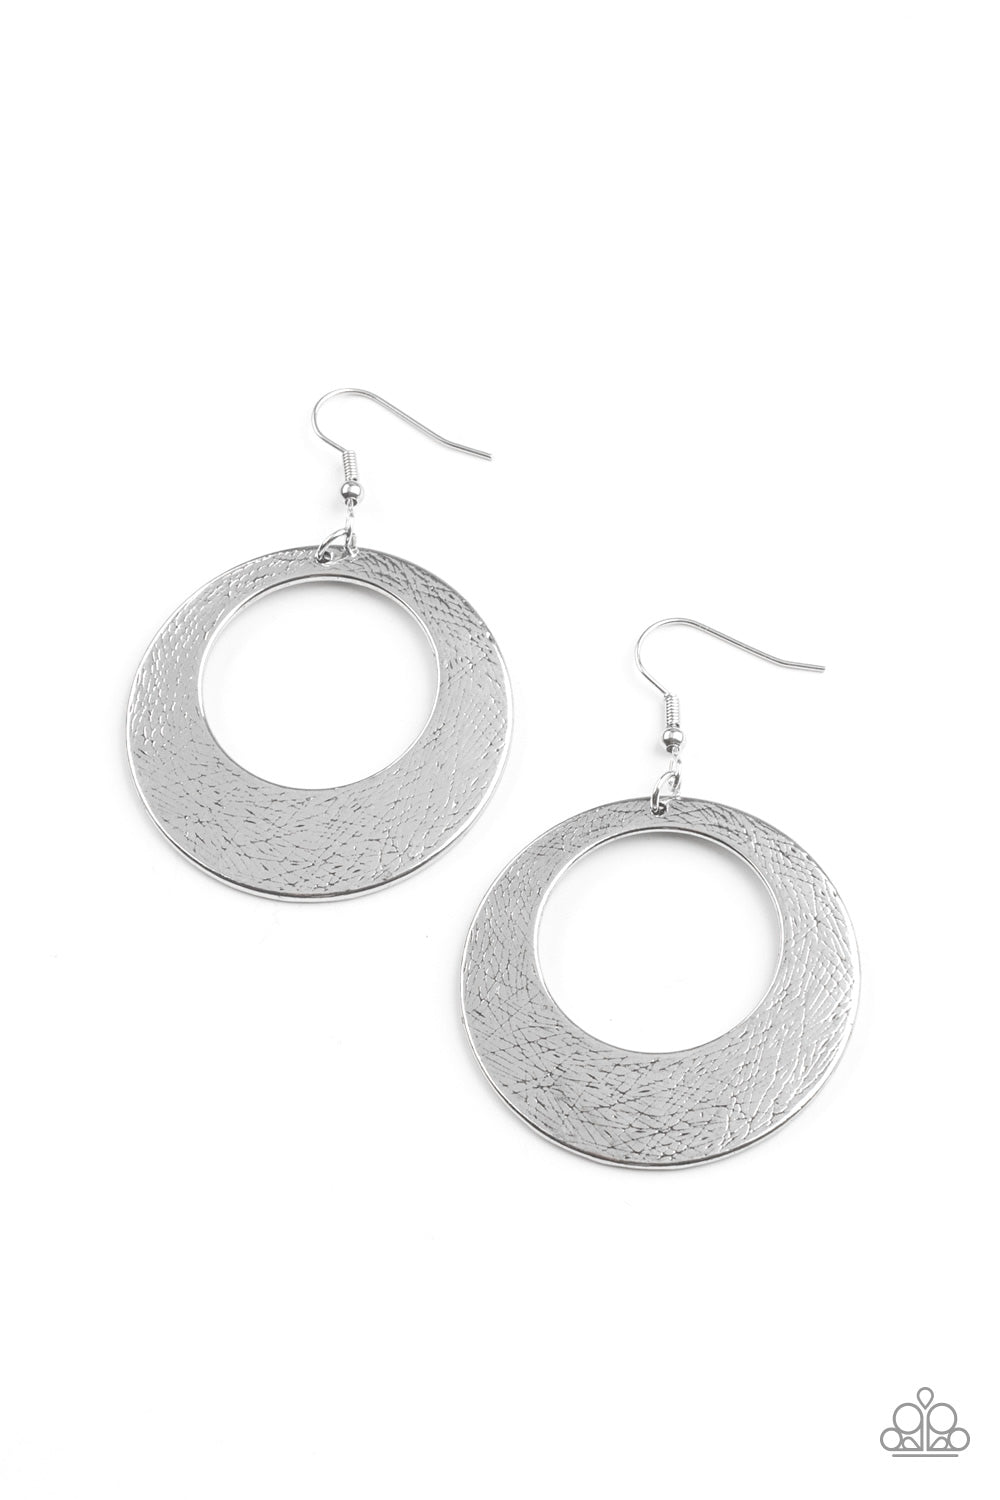 Outer Plains - Silver Round Frame Earrings - Paparazzi Accessories brushed in antiqued shimmer, a round silver frame is scratched in a gritty linear pattern for a rustic fashion. Earring attaches to a standard fishhook fitting.  Sold as one pair of earrings.